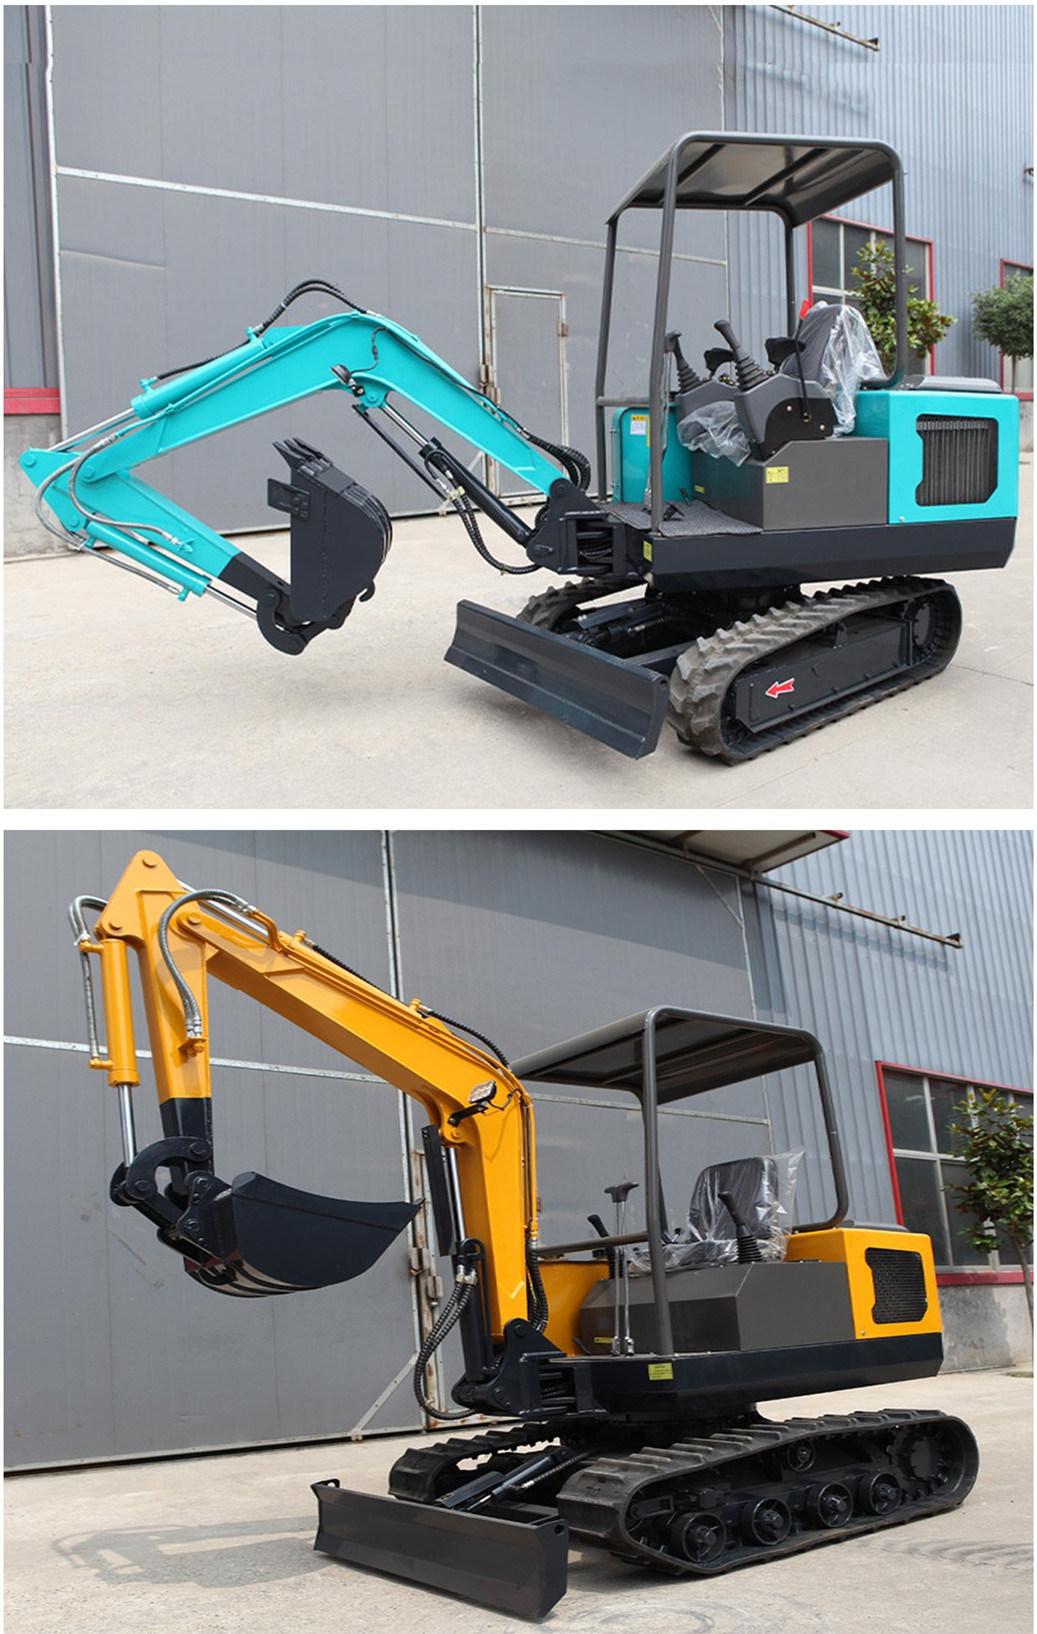 High-Power Mini Bucket Teeth Excavator with Spare Parts